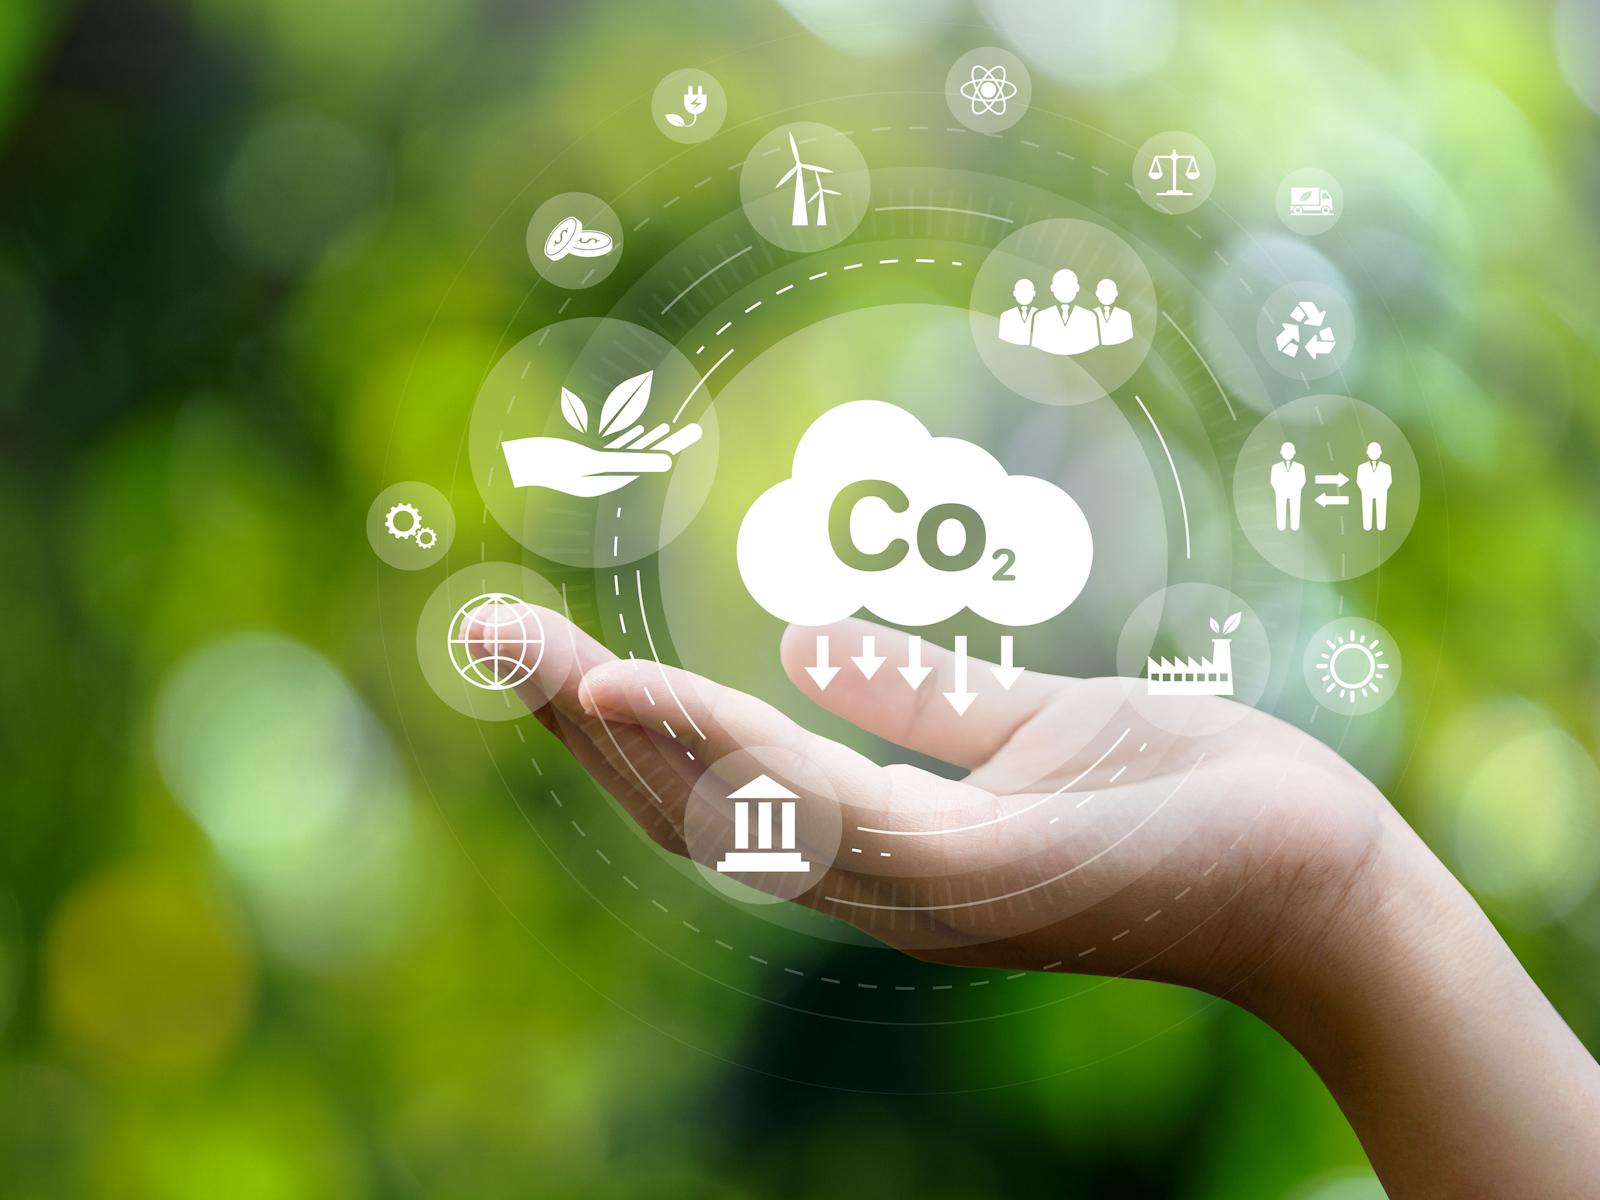 Digital image of a hand holding bubbles that contain various icons. These include icons for carbon dioxide reduction, recycling, wind energy, solar energy, and more.